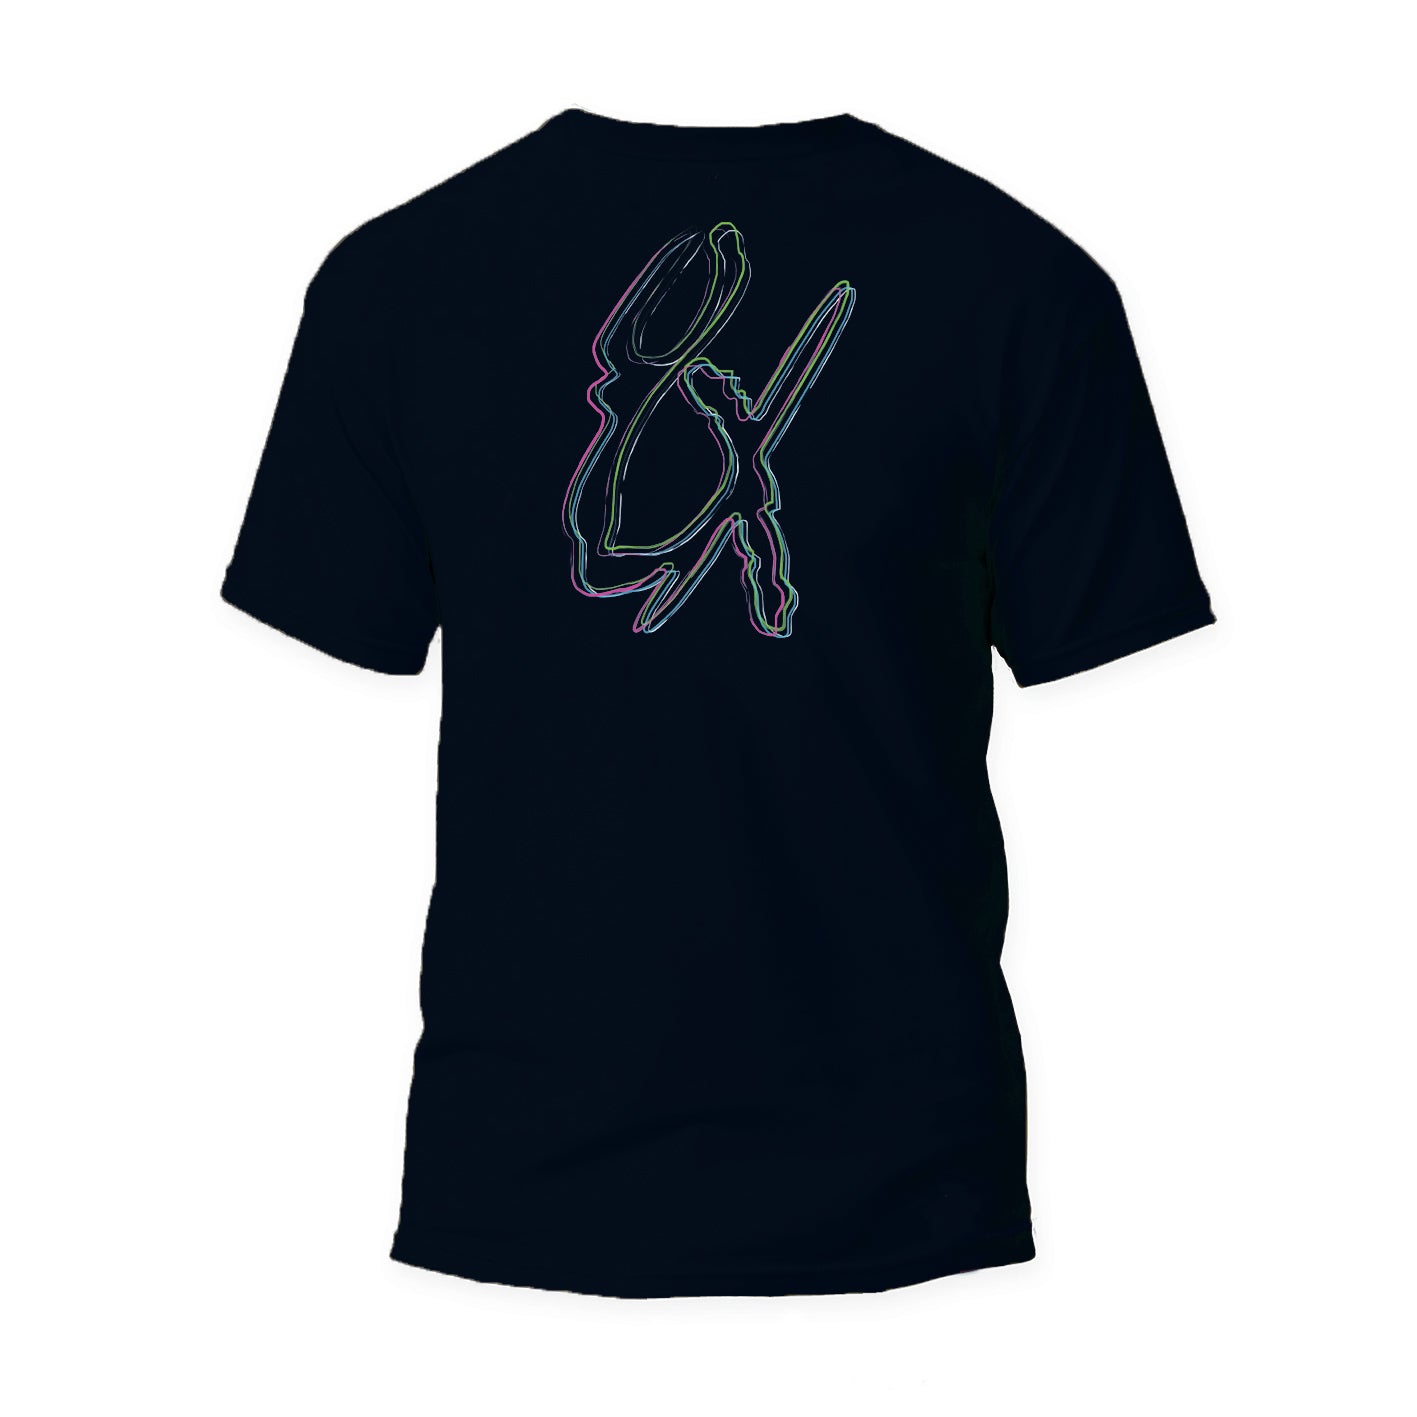 Eight x Frequency Logo Graphic T-Shirt - Navy Navy / 2XL